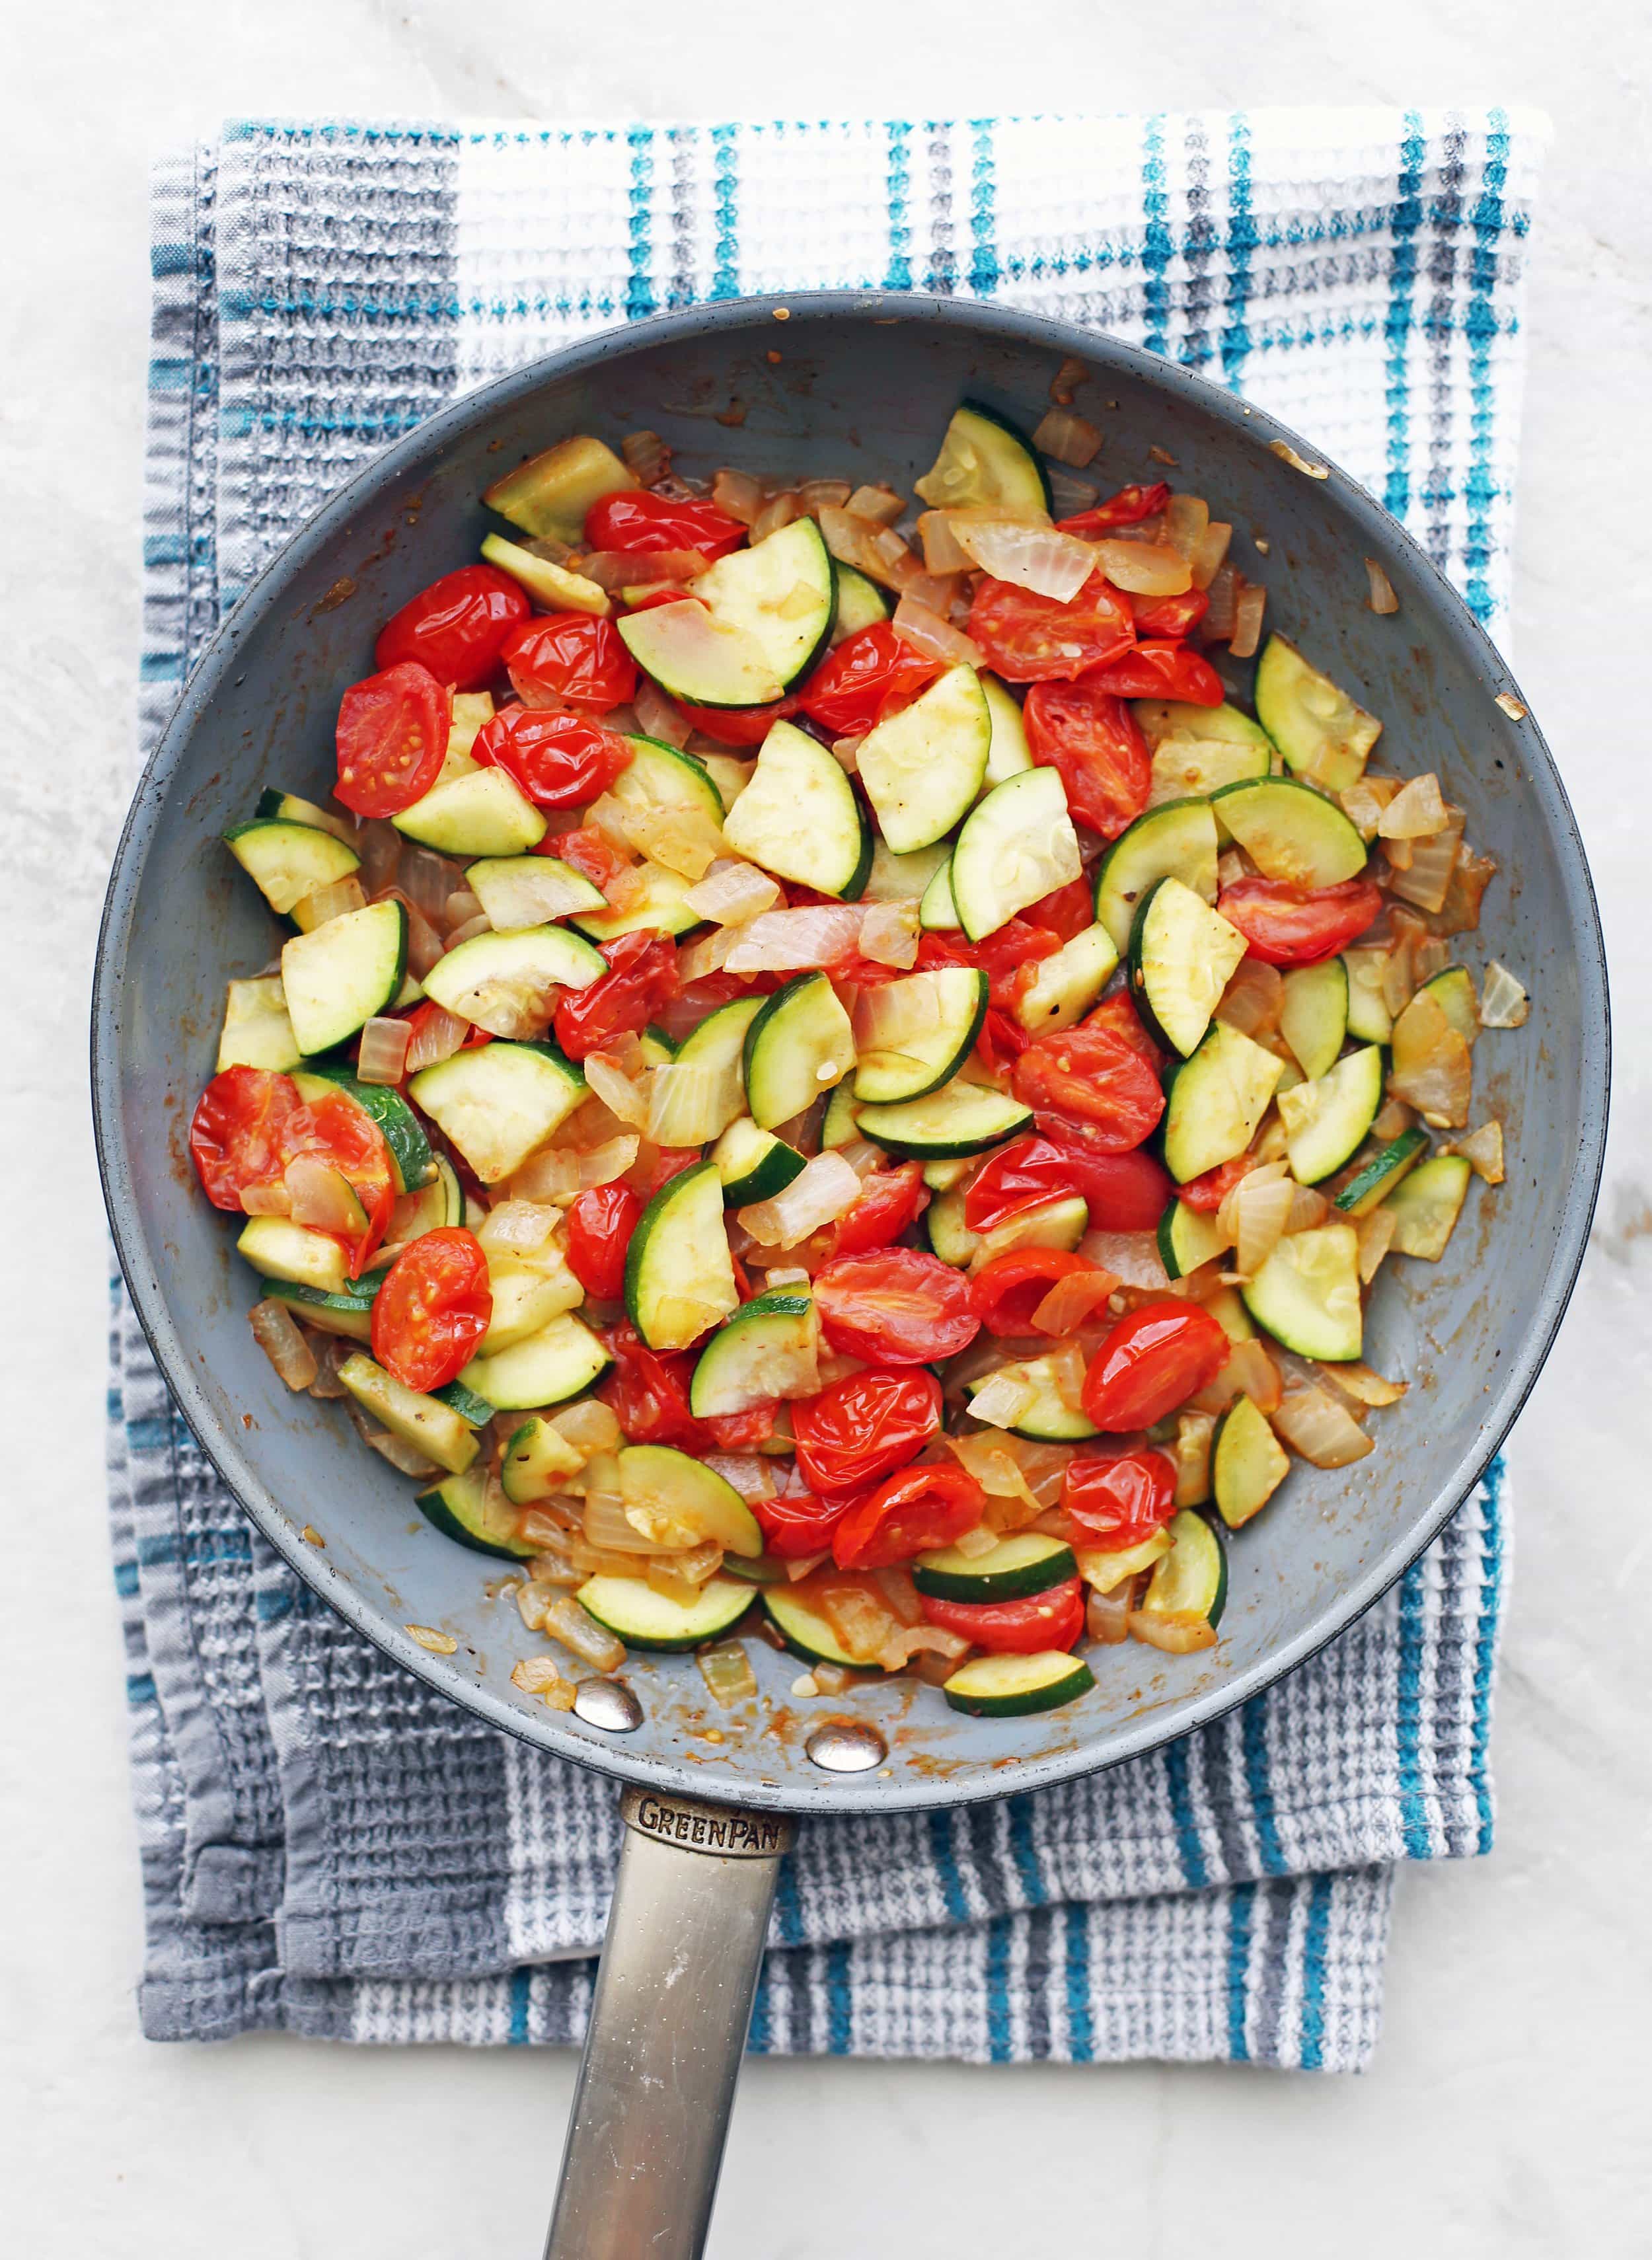 Quick sautéed onions, green zucchini, and tomatoes in a large skillet.